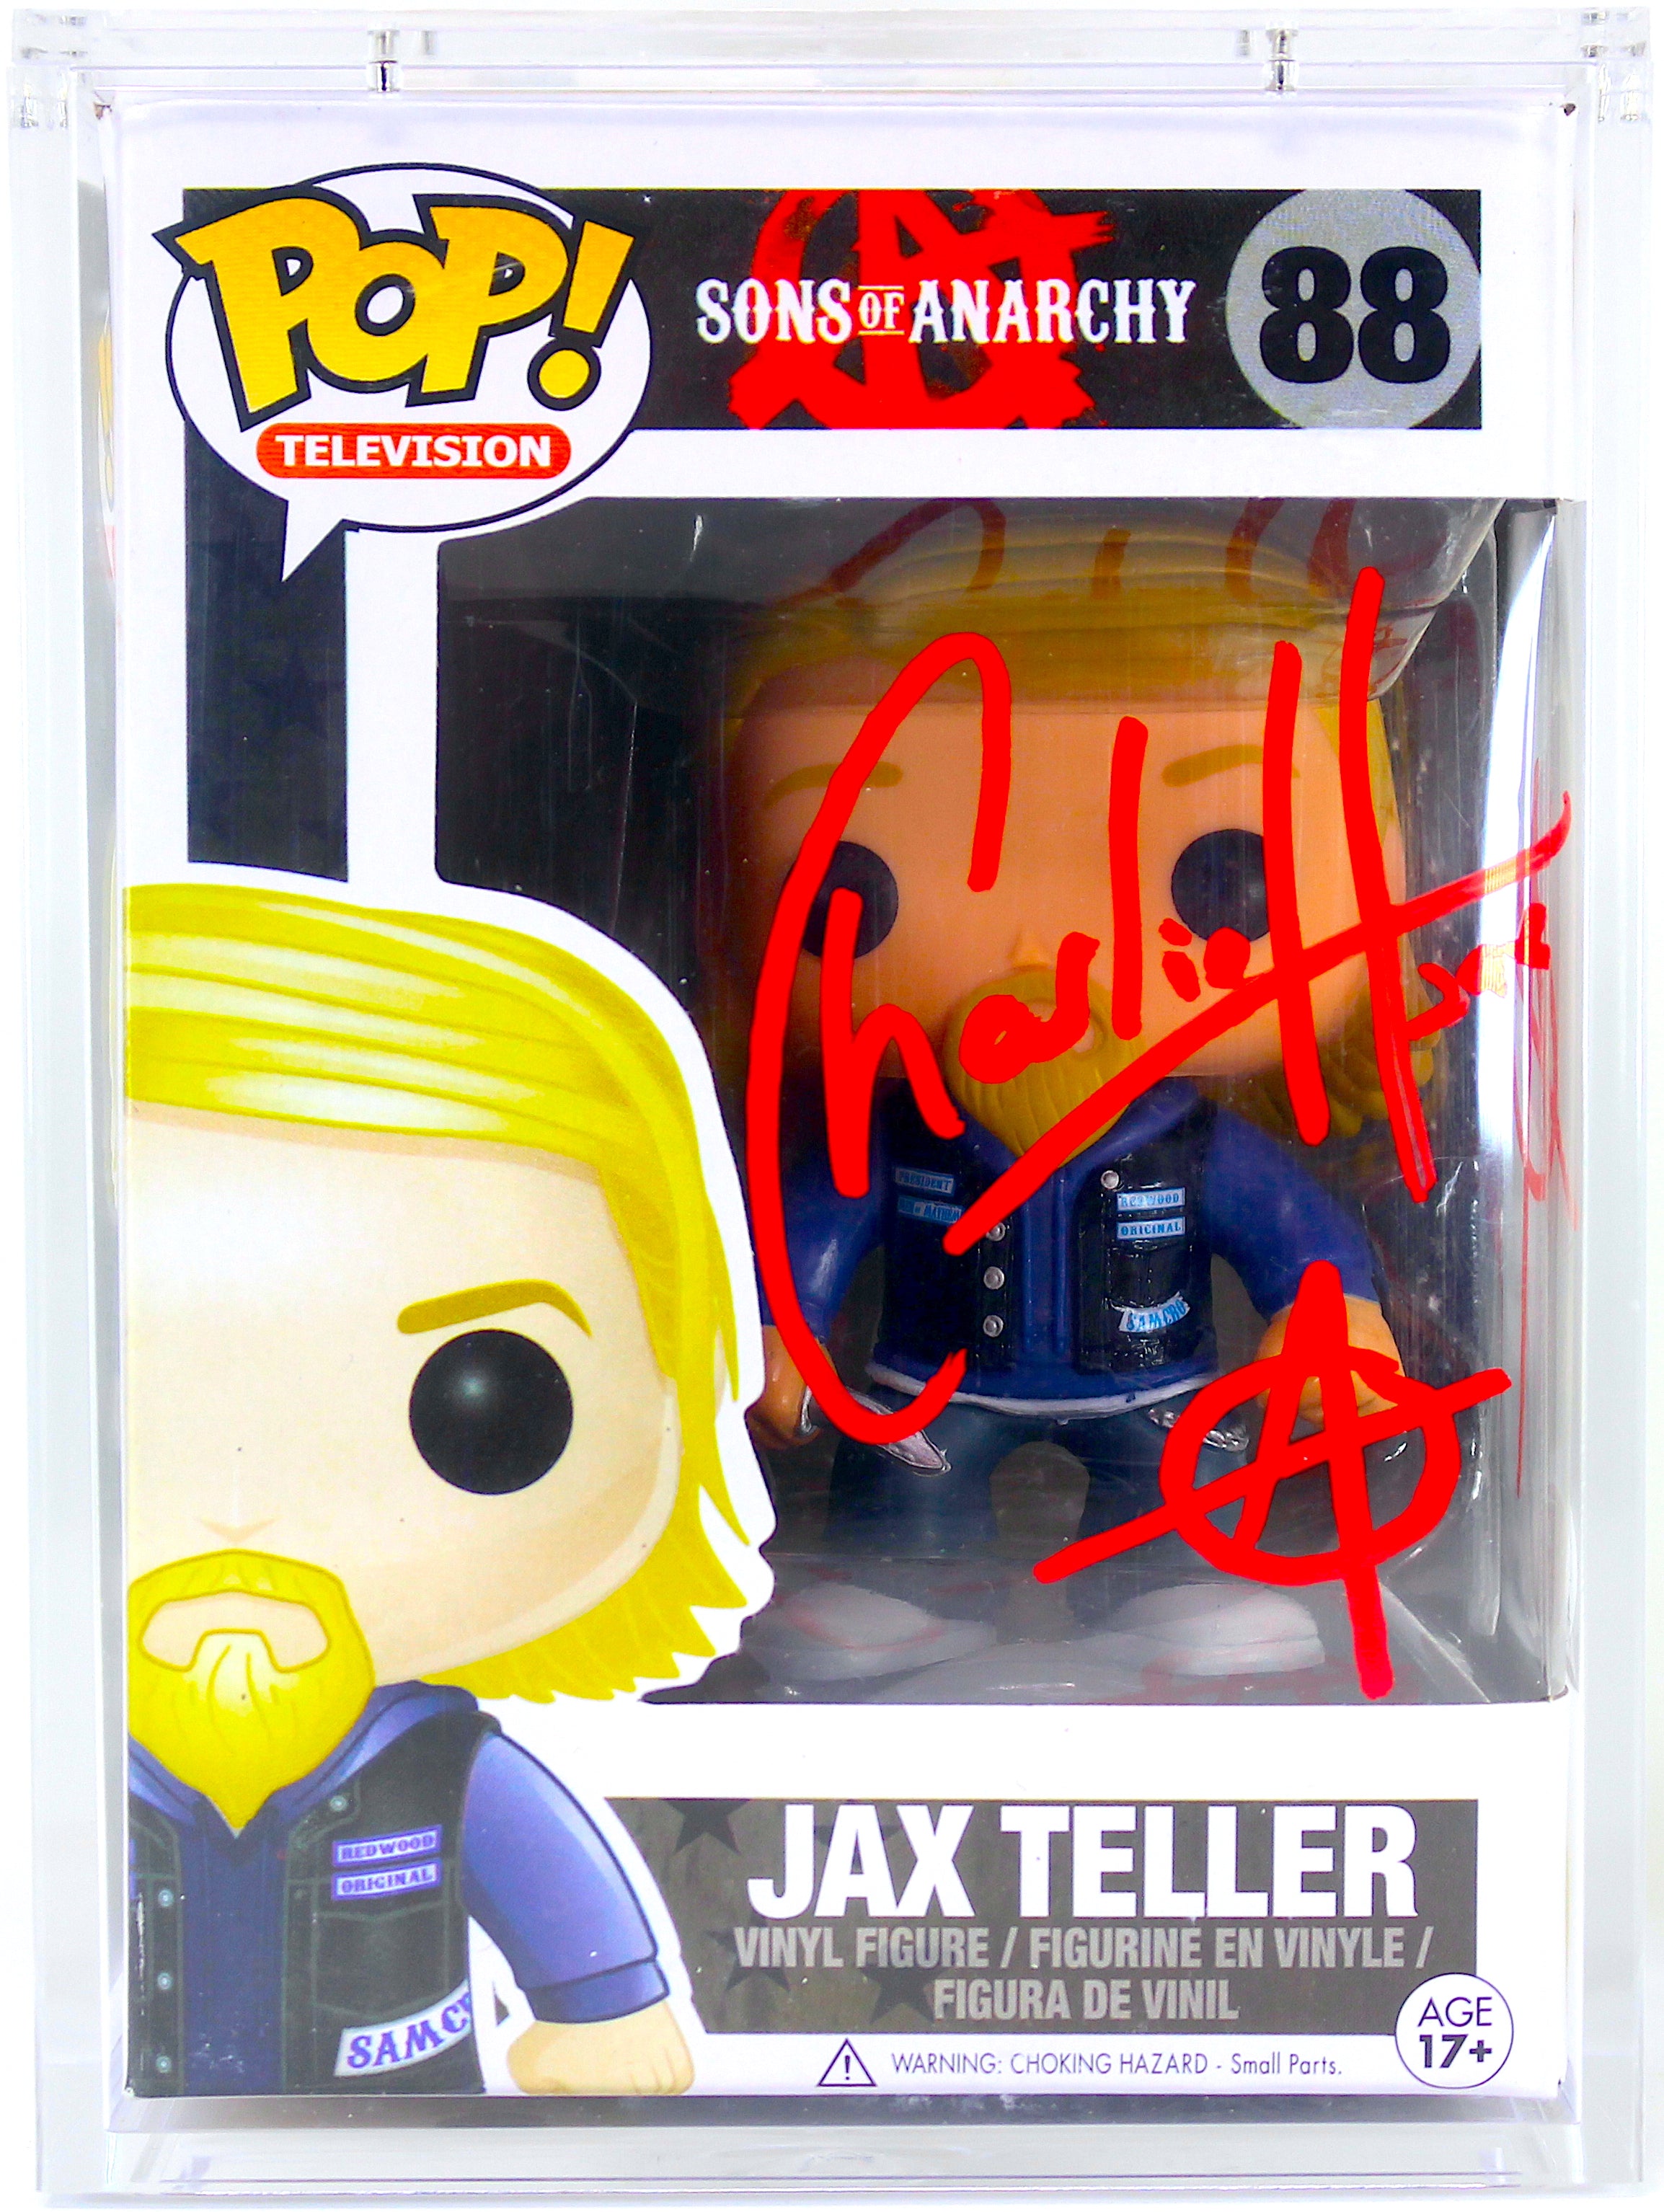 Vaulted 2013 Teller Funko Pop! Signed By Charlie Hunnam Sons Anarchy TV Series Signature is Authenticated By JSA ✓